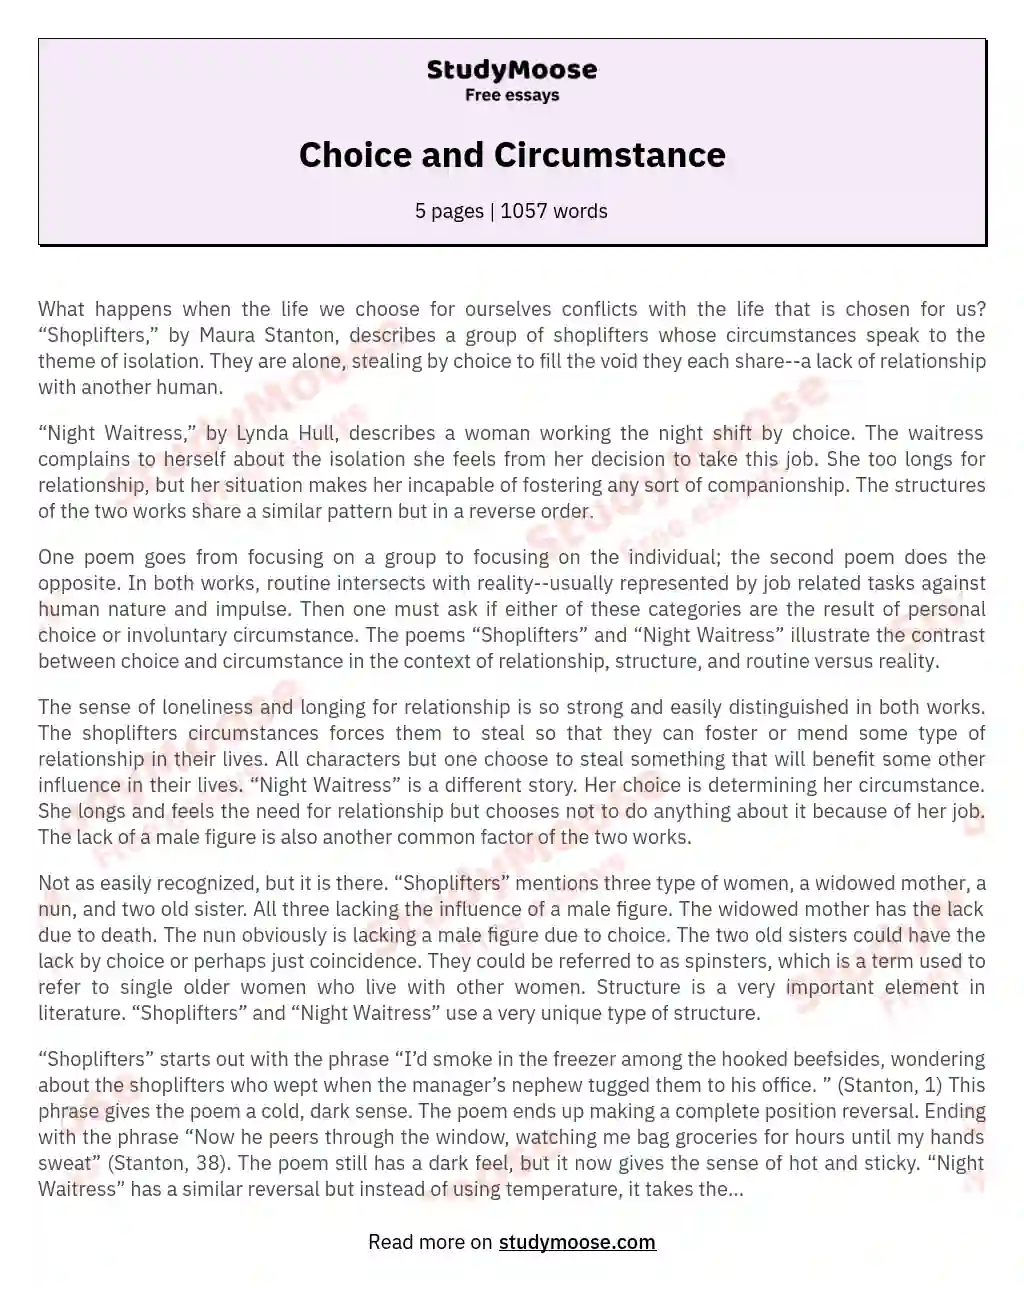 Choice and Circumstance essay